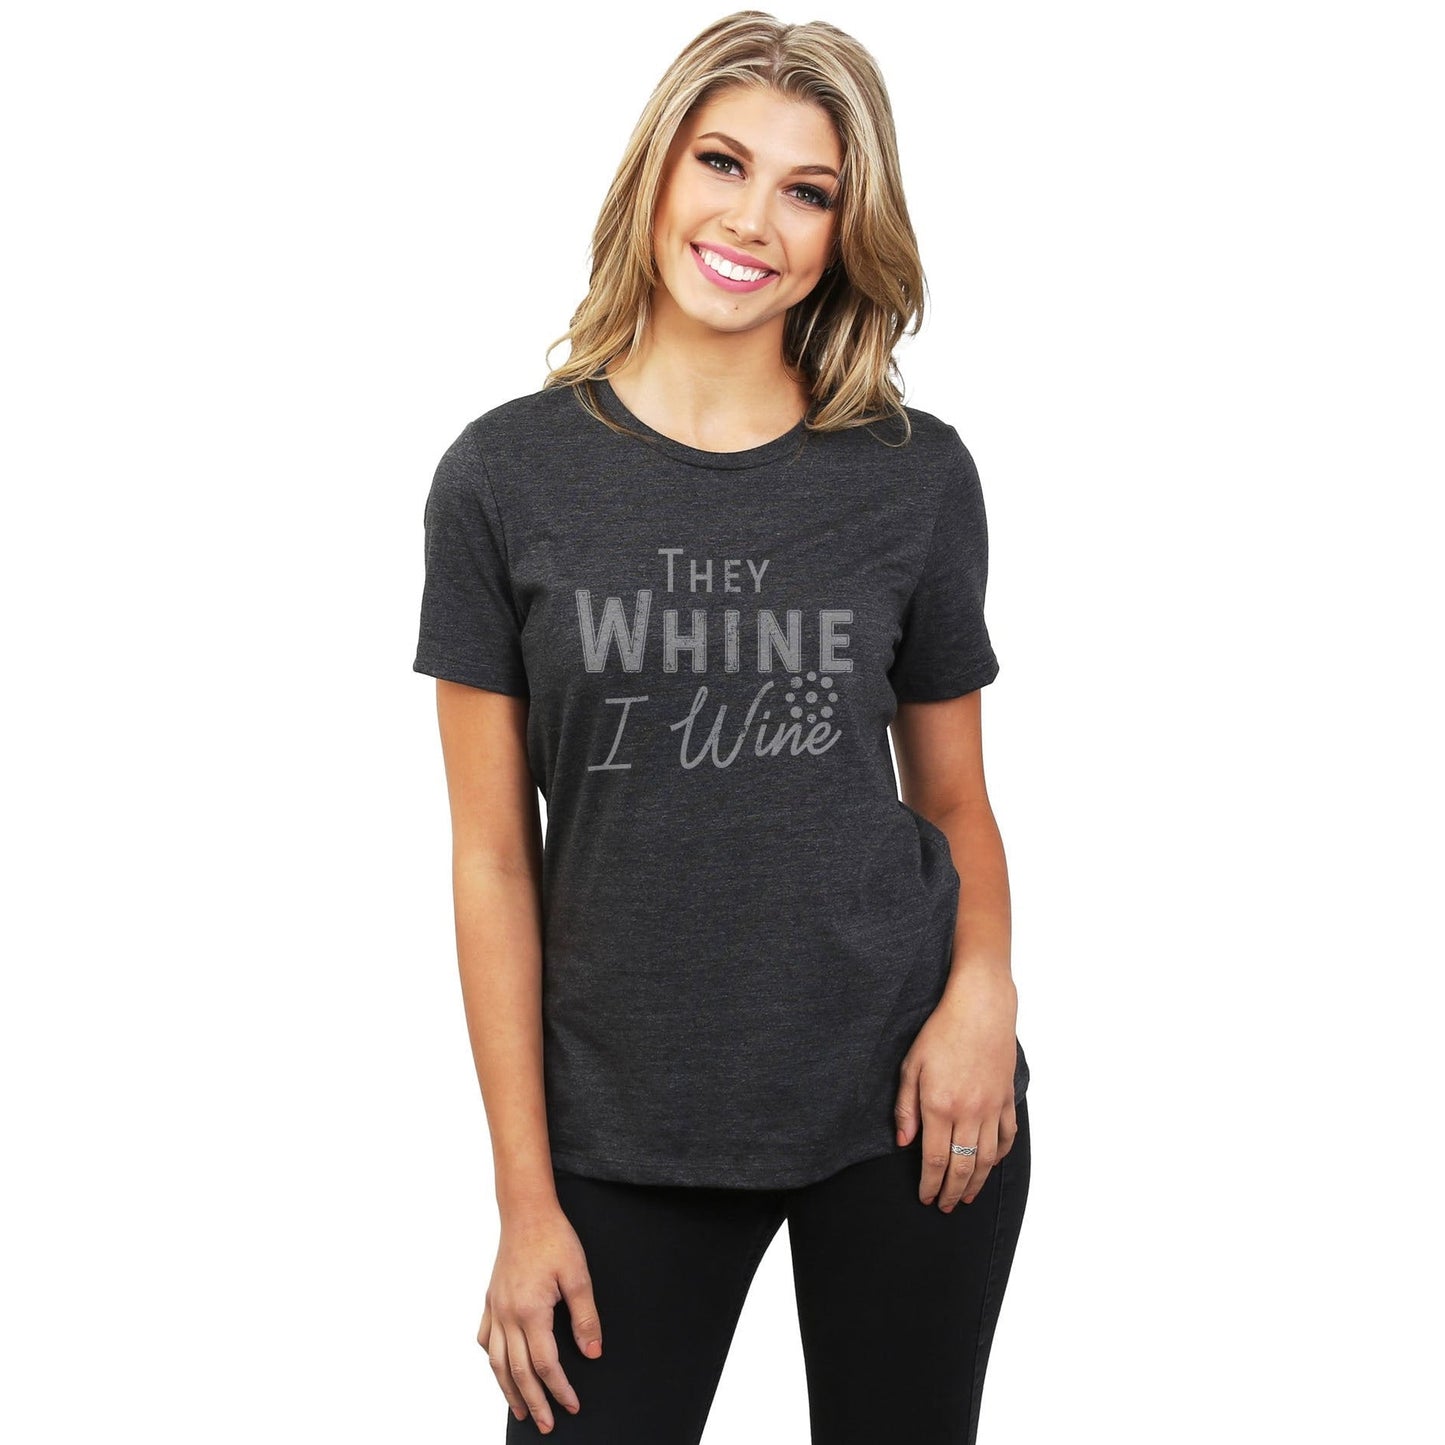 They Whine I Wine - Stories You Can Wear